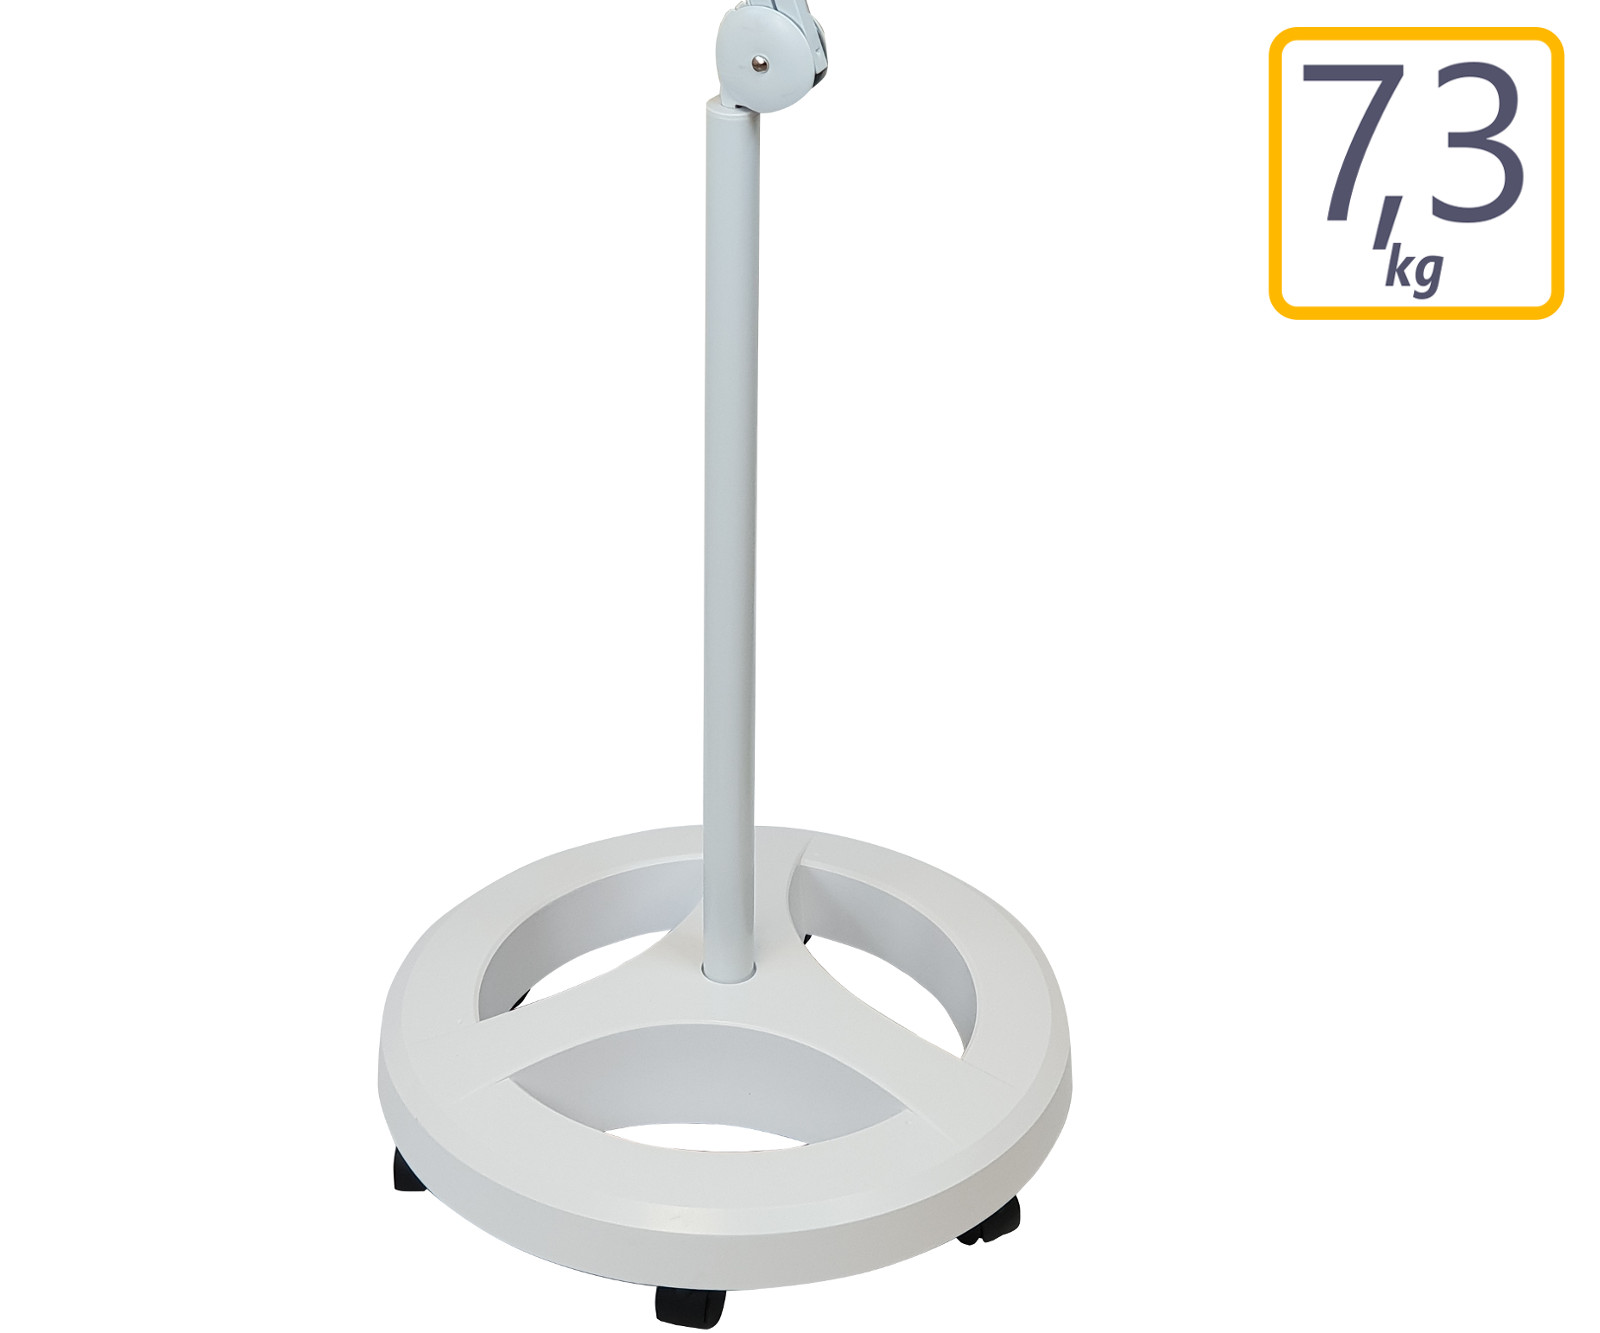 Wheeled stand for magnifier lamp, round with 6 wheels